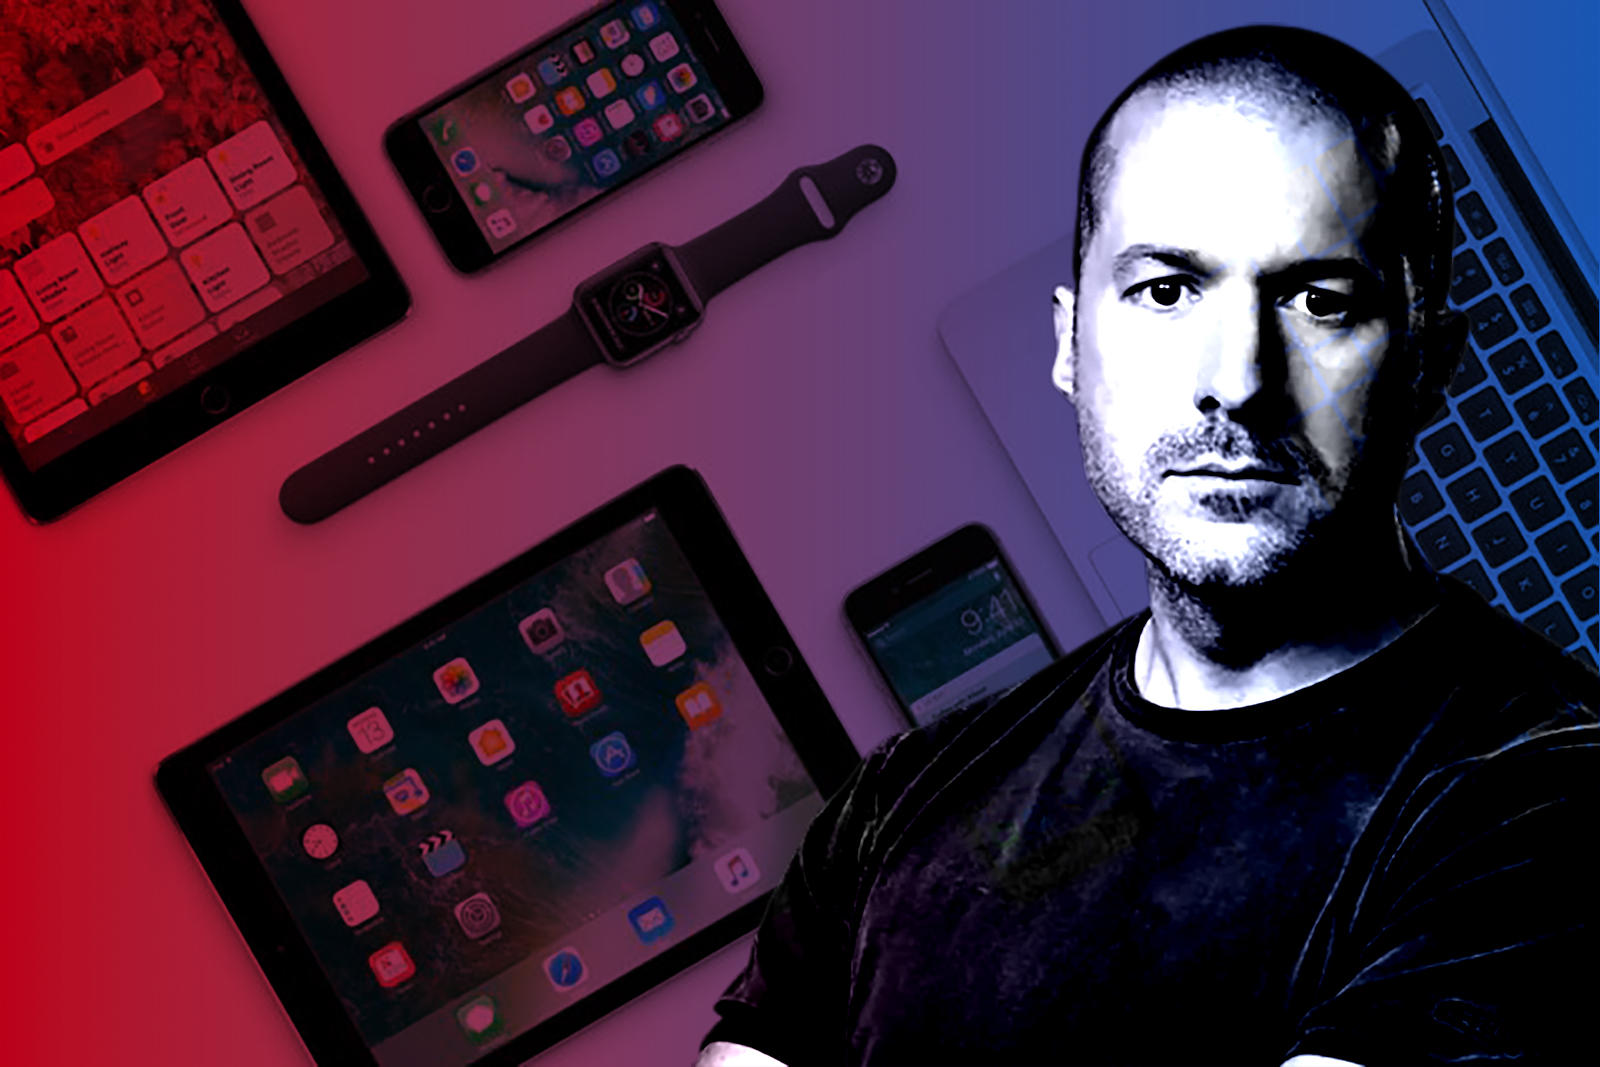 Jony Ive just worked (until he didn't): The end of Apple's hardware era?